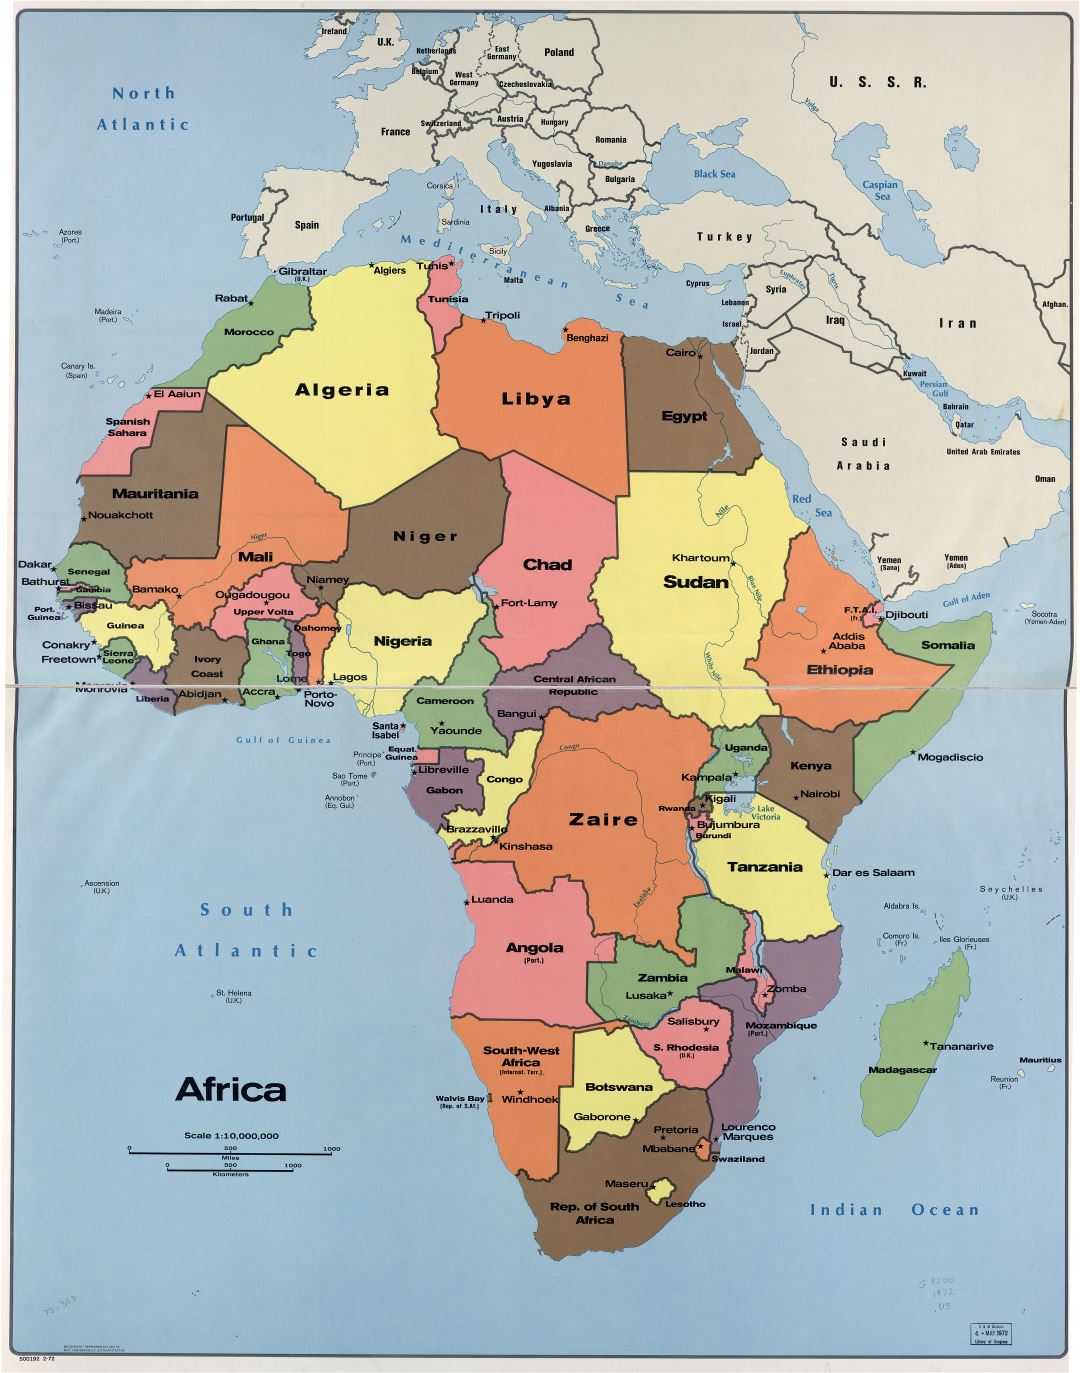 In high resolution detailed political map of Africa with the marks of capital cities and names of countries - 1972